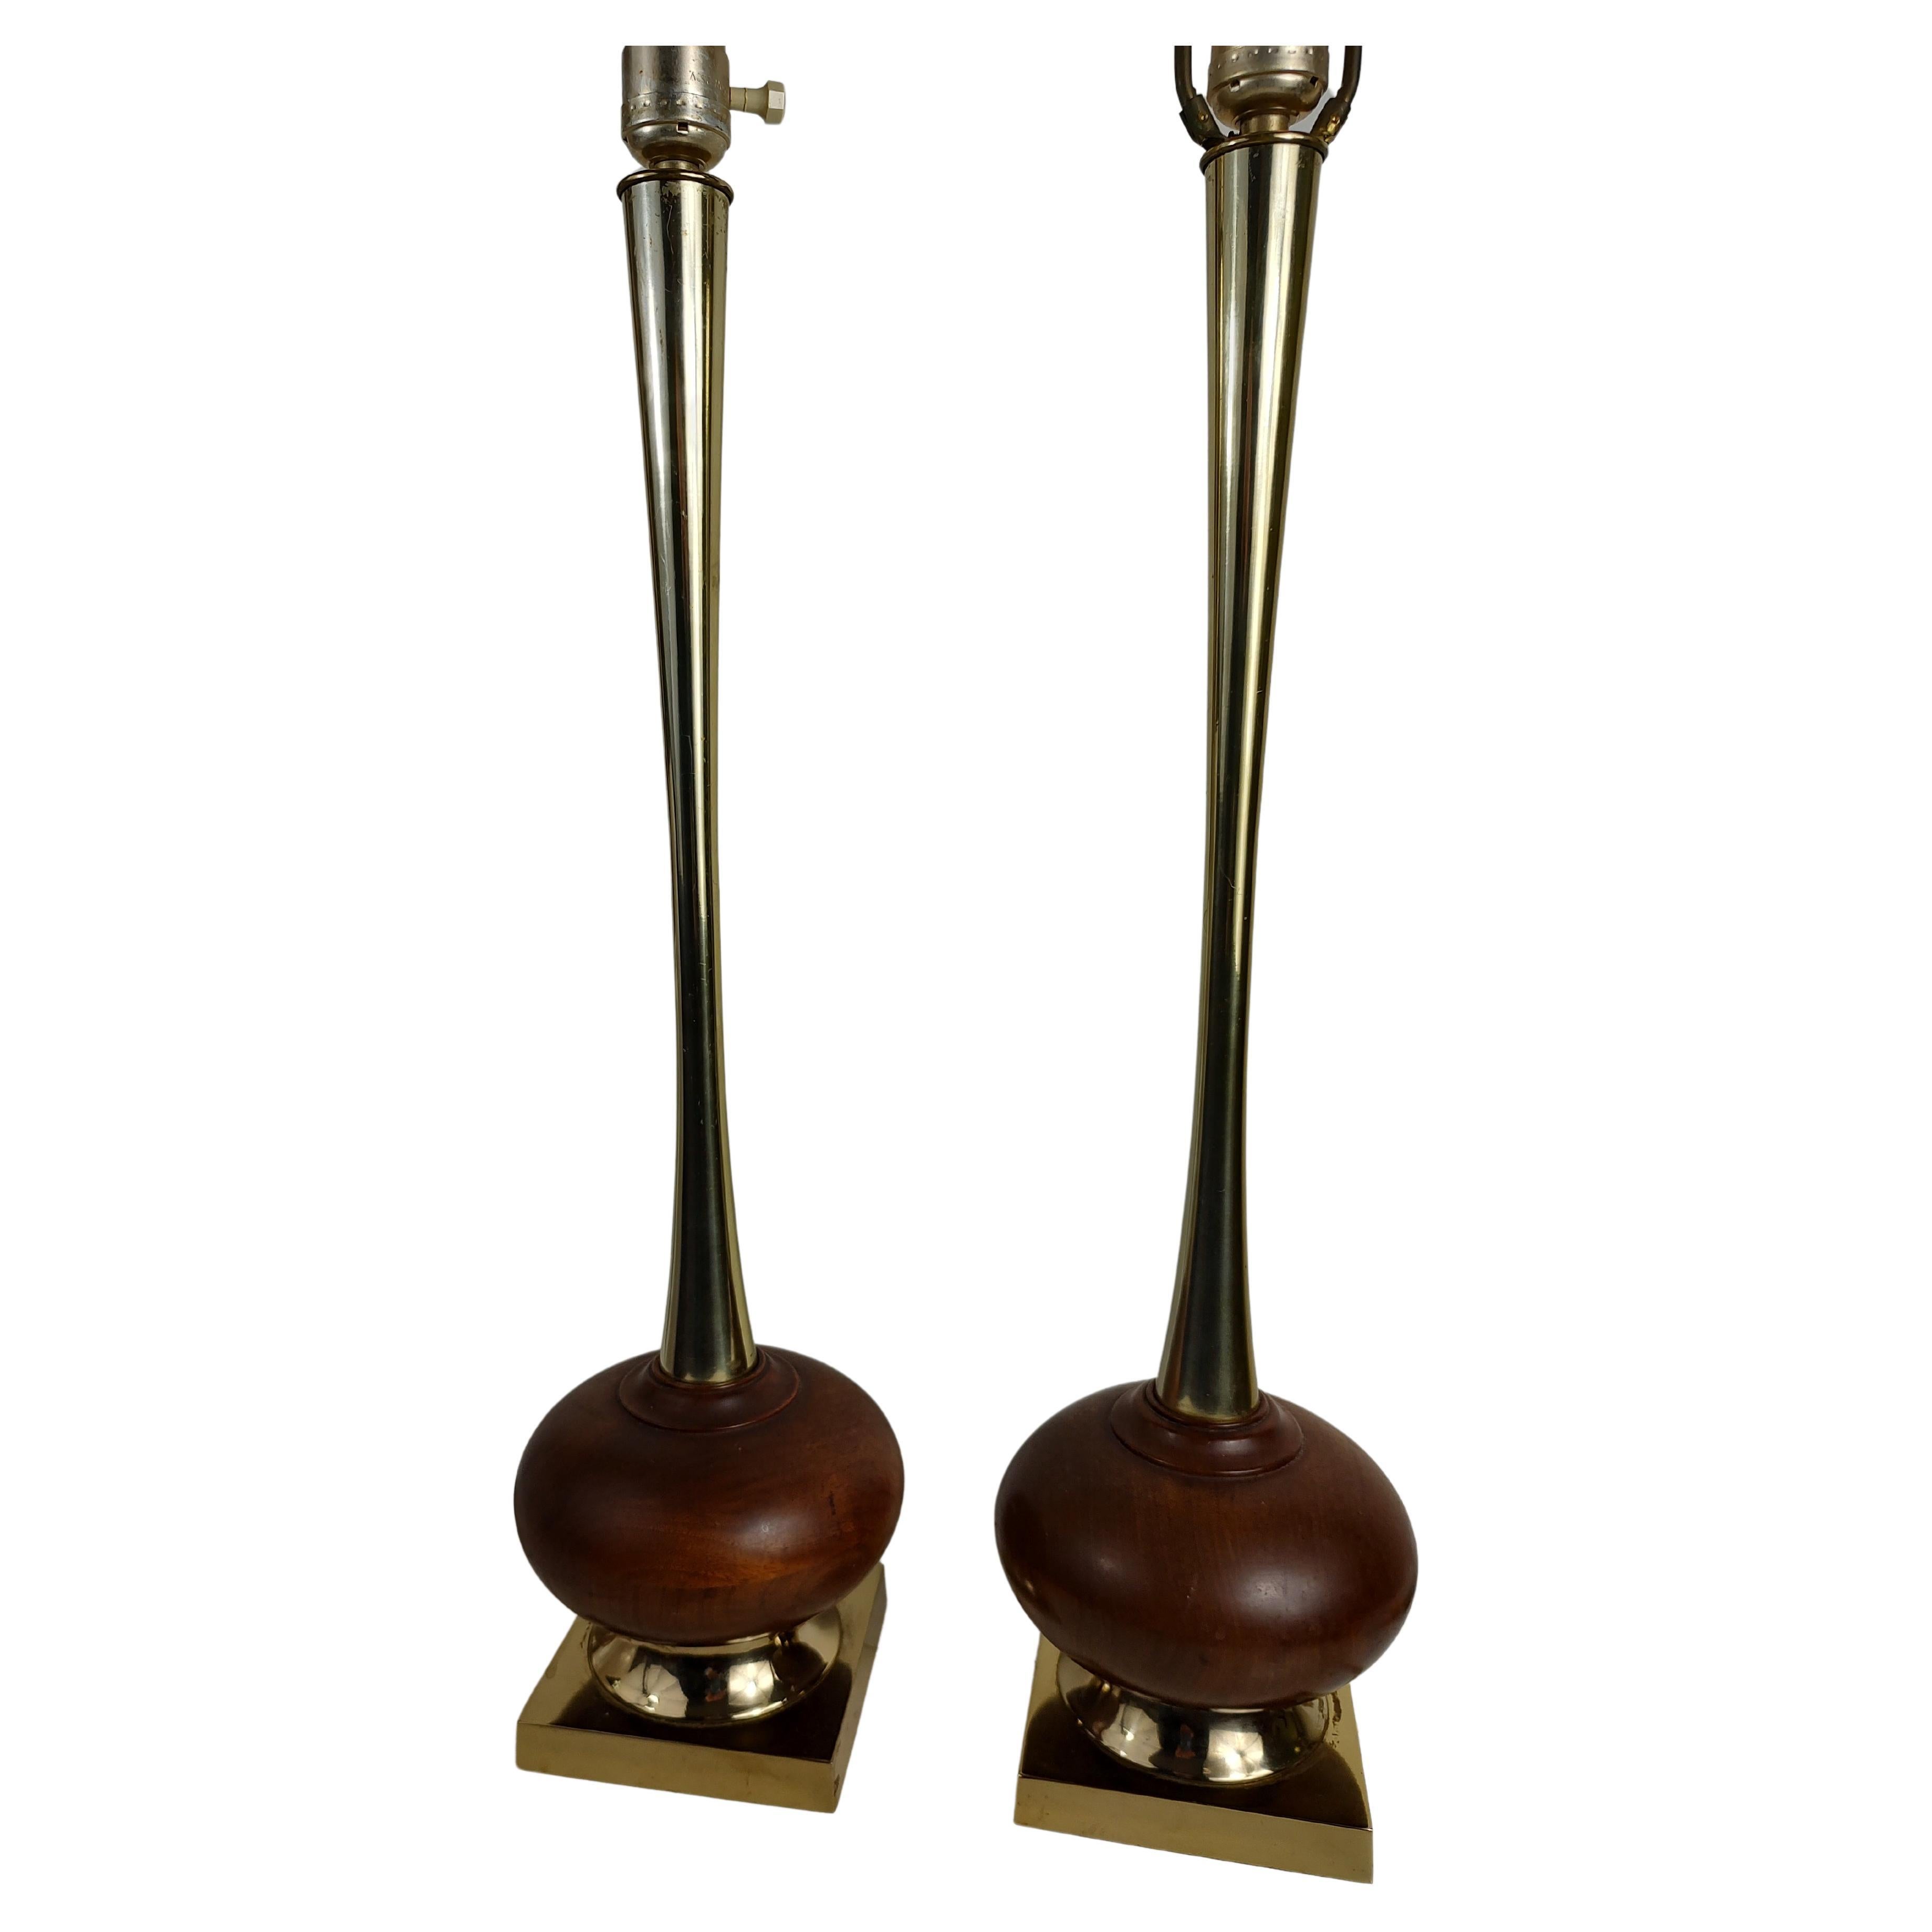 Pair of Tall Walnut & Brass Mid-Century Modern Table Lamps attrib Laurel Lamp co For Sale